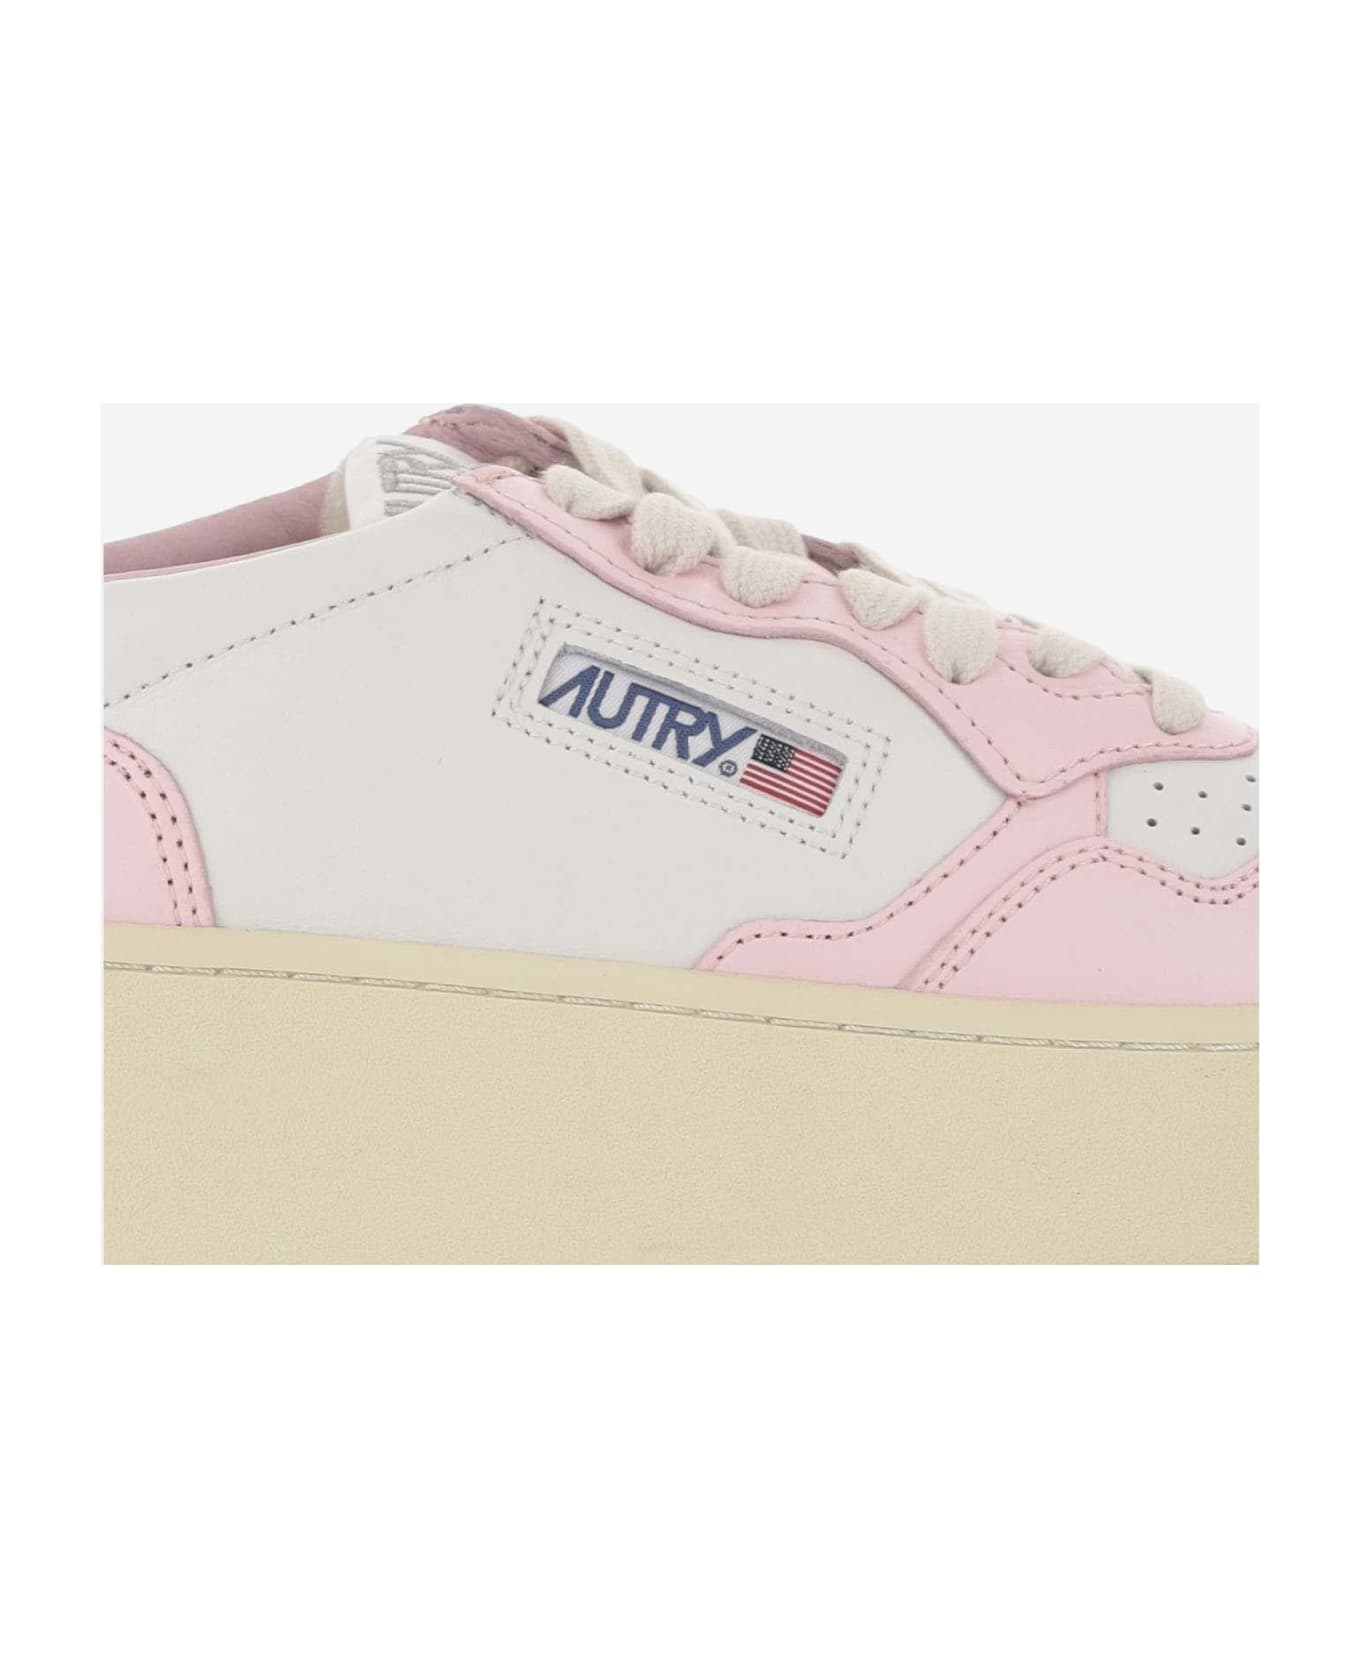 Autry Medalist Platform Low Leather Sneakers - Pink スニーカー